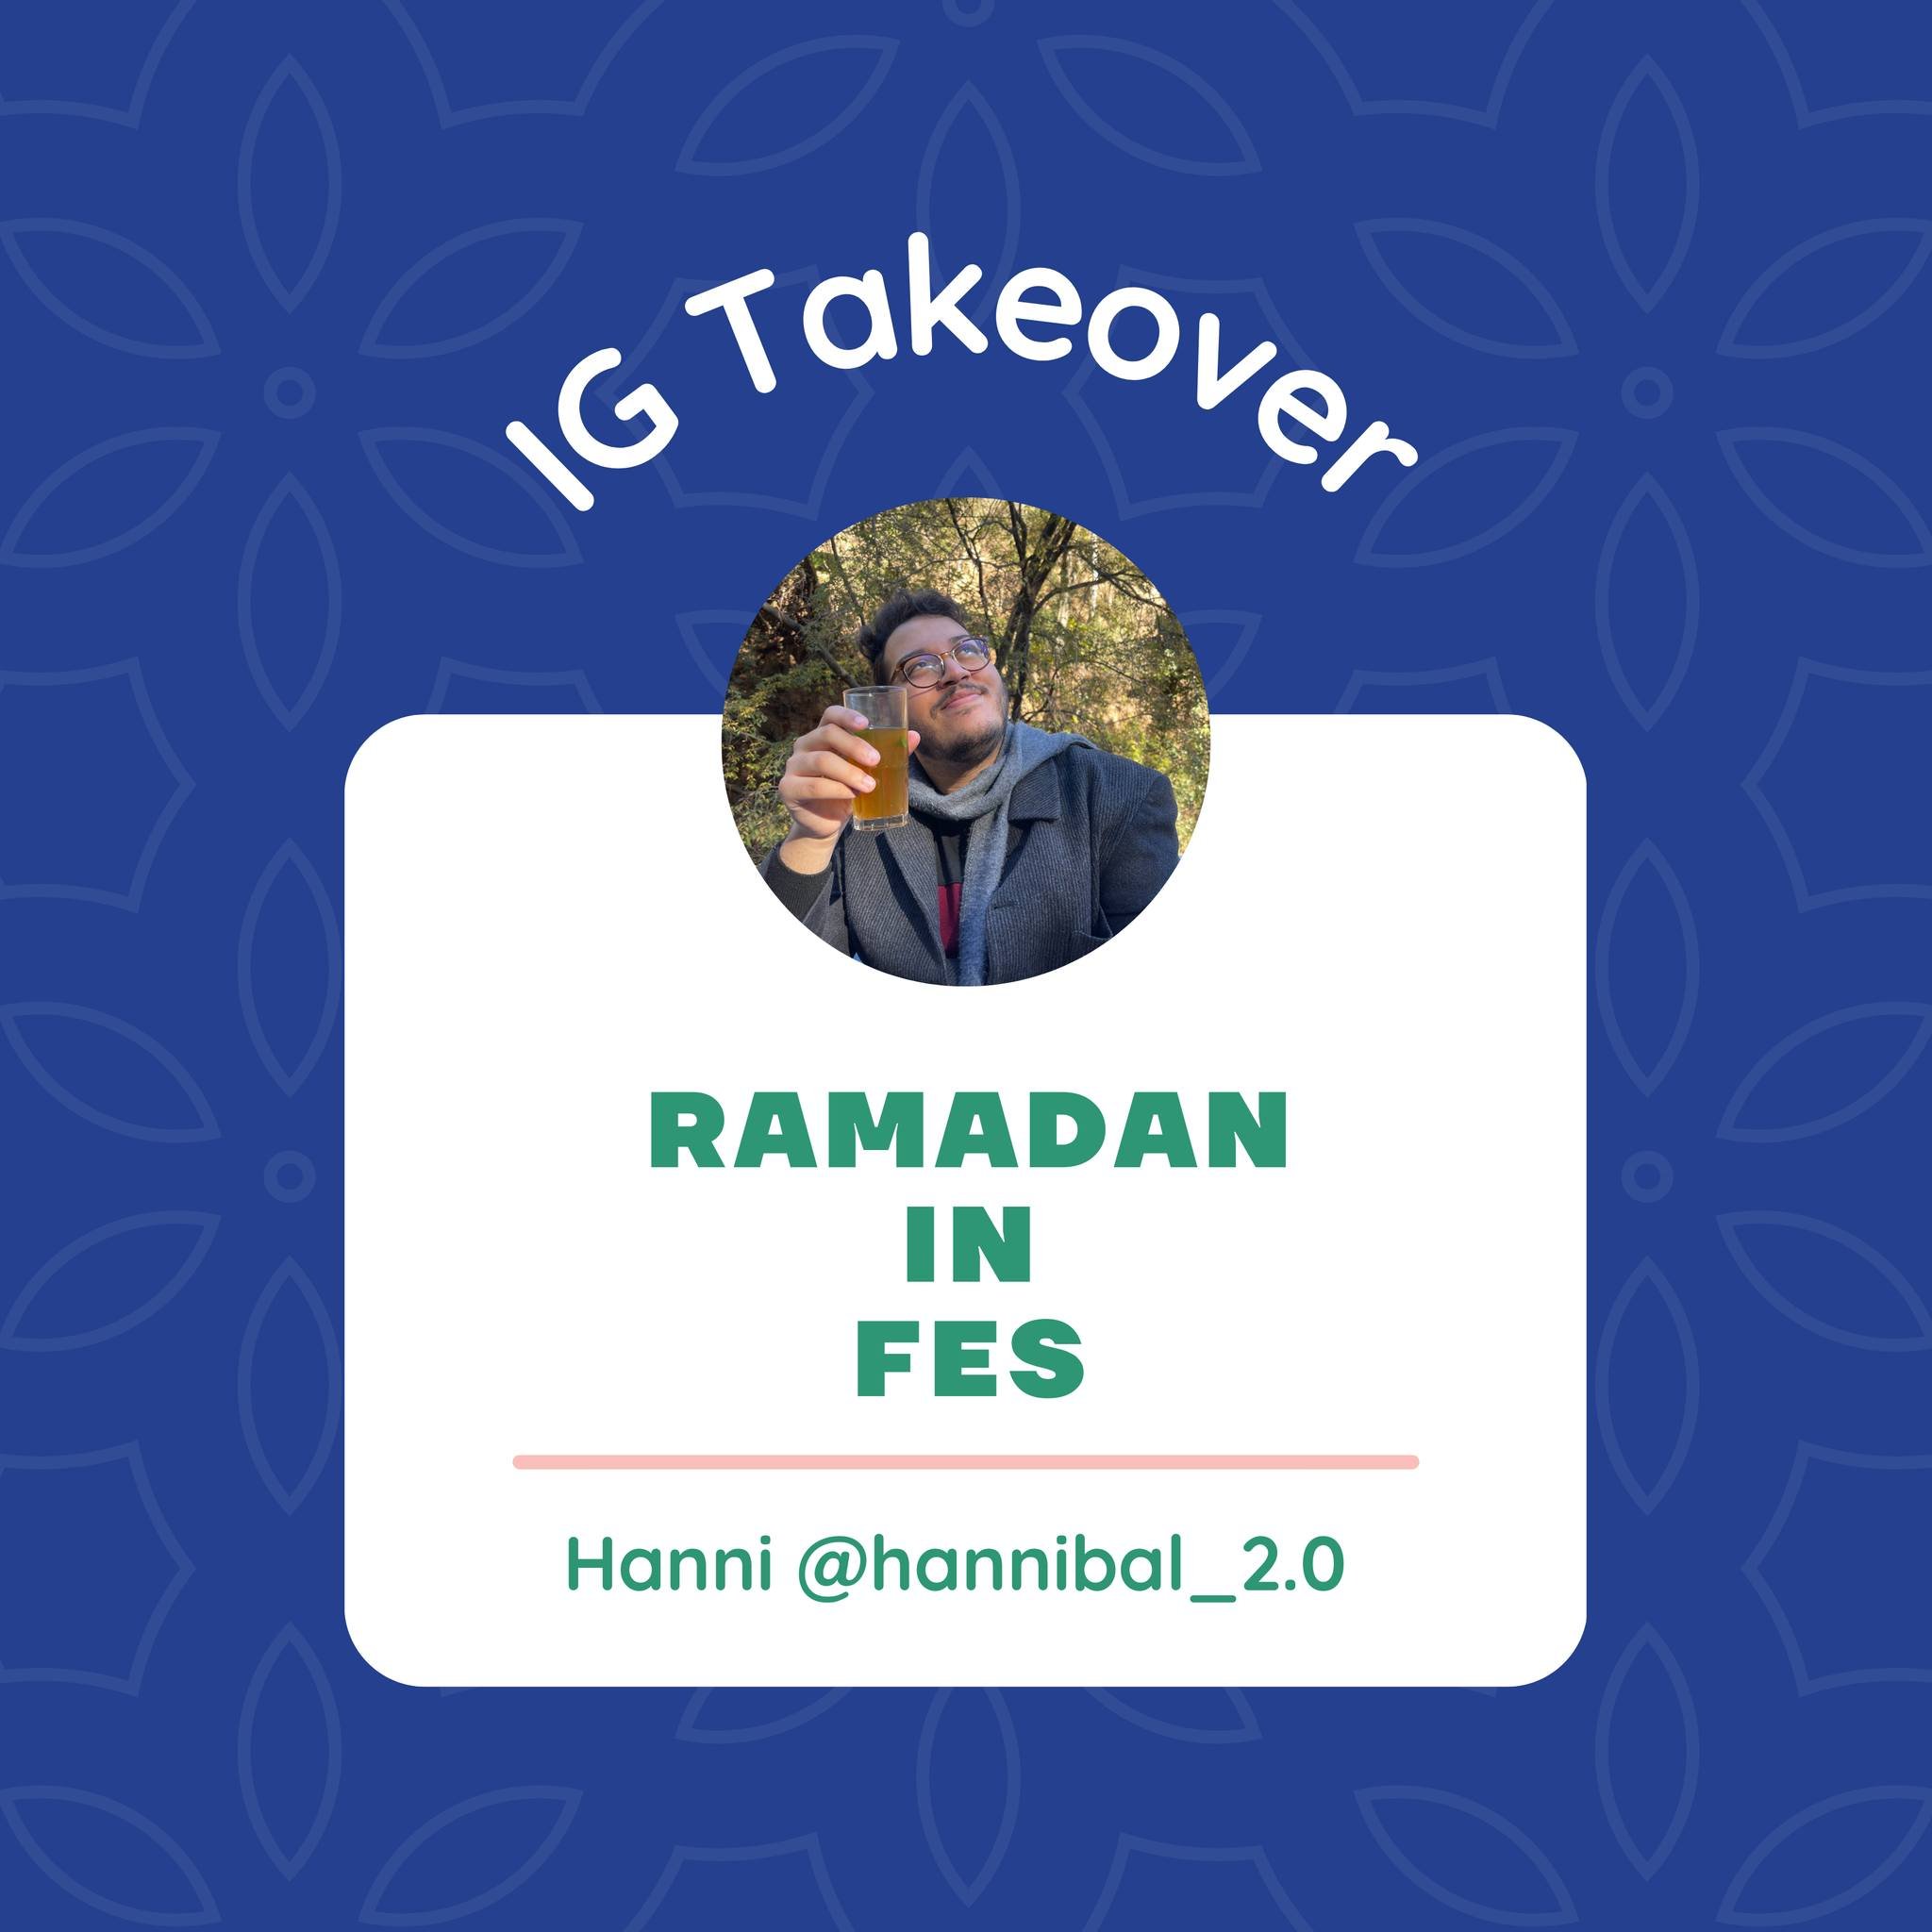 Remember when we explored Fes during @vegfestmorocco  2 years ago?  Tomorrow, get ready for a special Ramadan takeover with Hanni! He'll be showing us around the city and sharing his local experiences. Don't miss out on our stories!

P.S. Craving mor